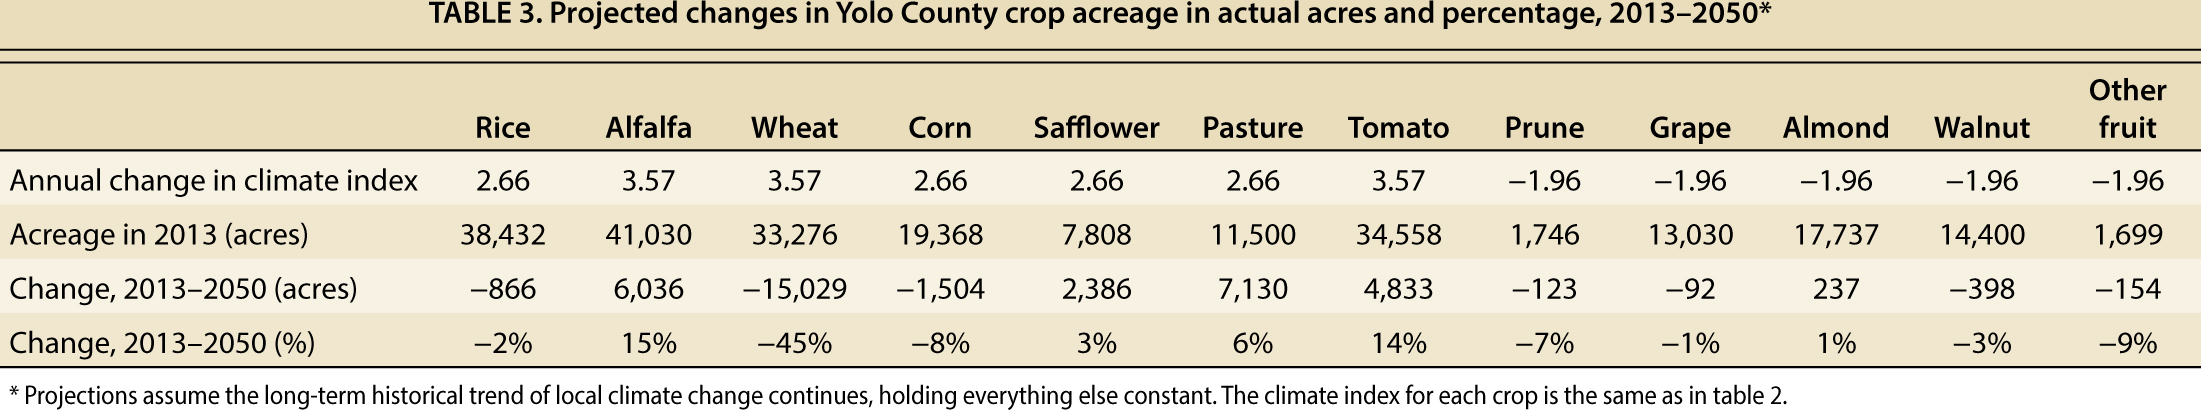 Projected changes in Yolo County crop acreage in actual acres and percentage, 2013–2050*